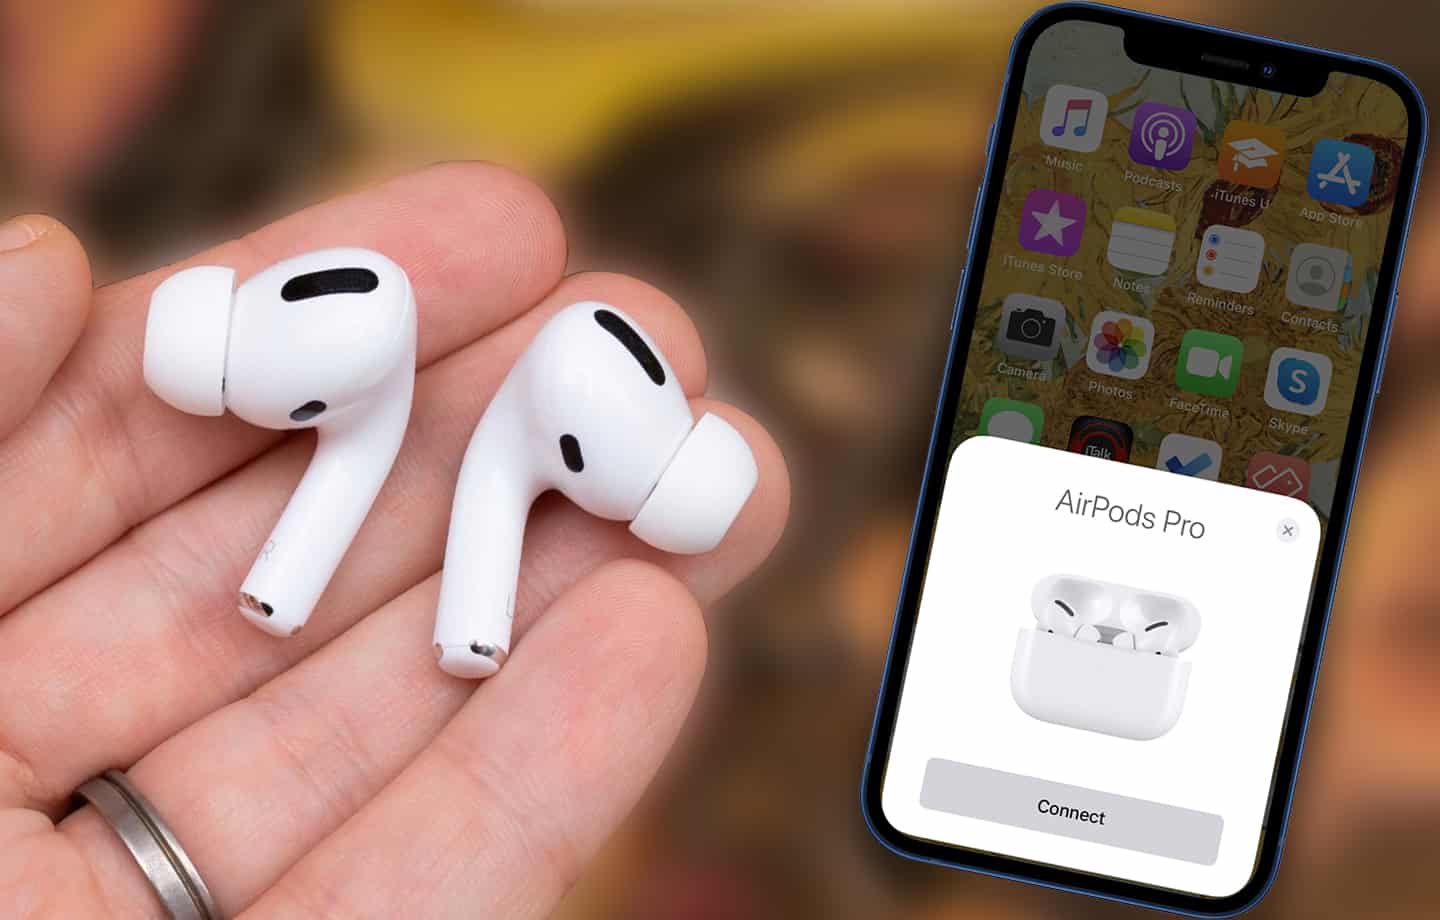 Airpods Connected No Sound? Here Are 5 Fix